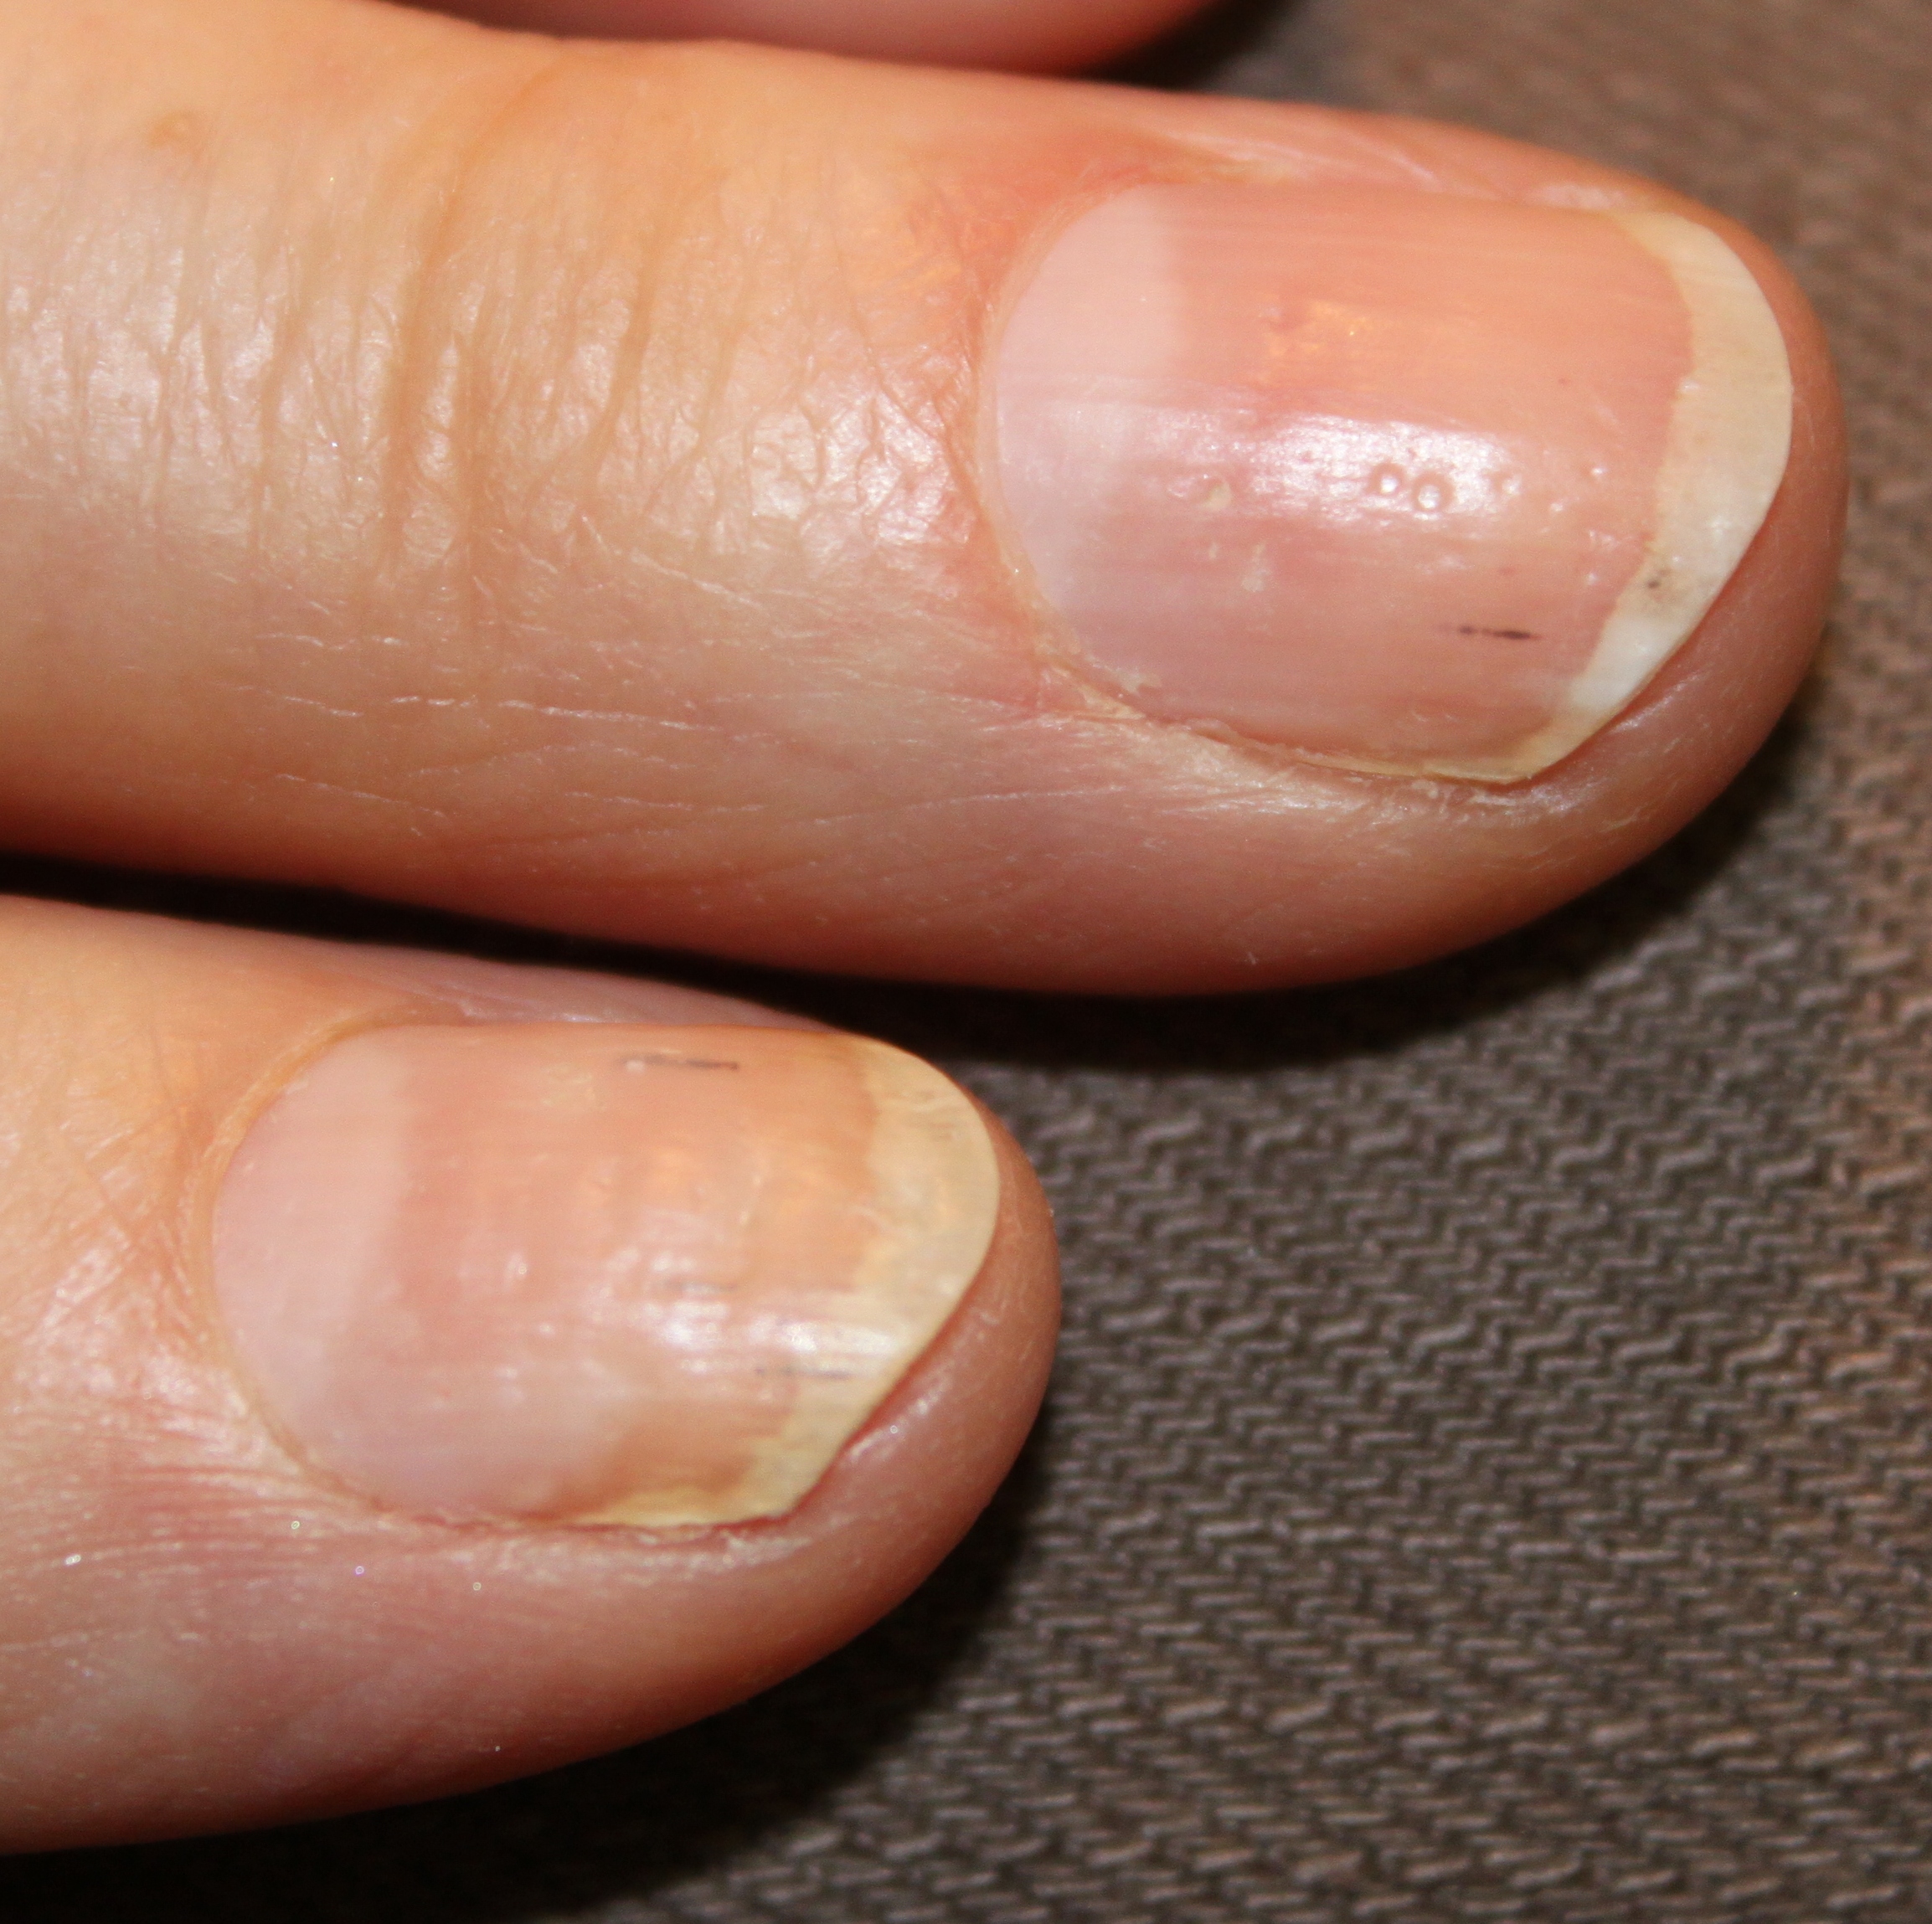 Nail psoriasis- psoriatic nail dystrophy